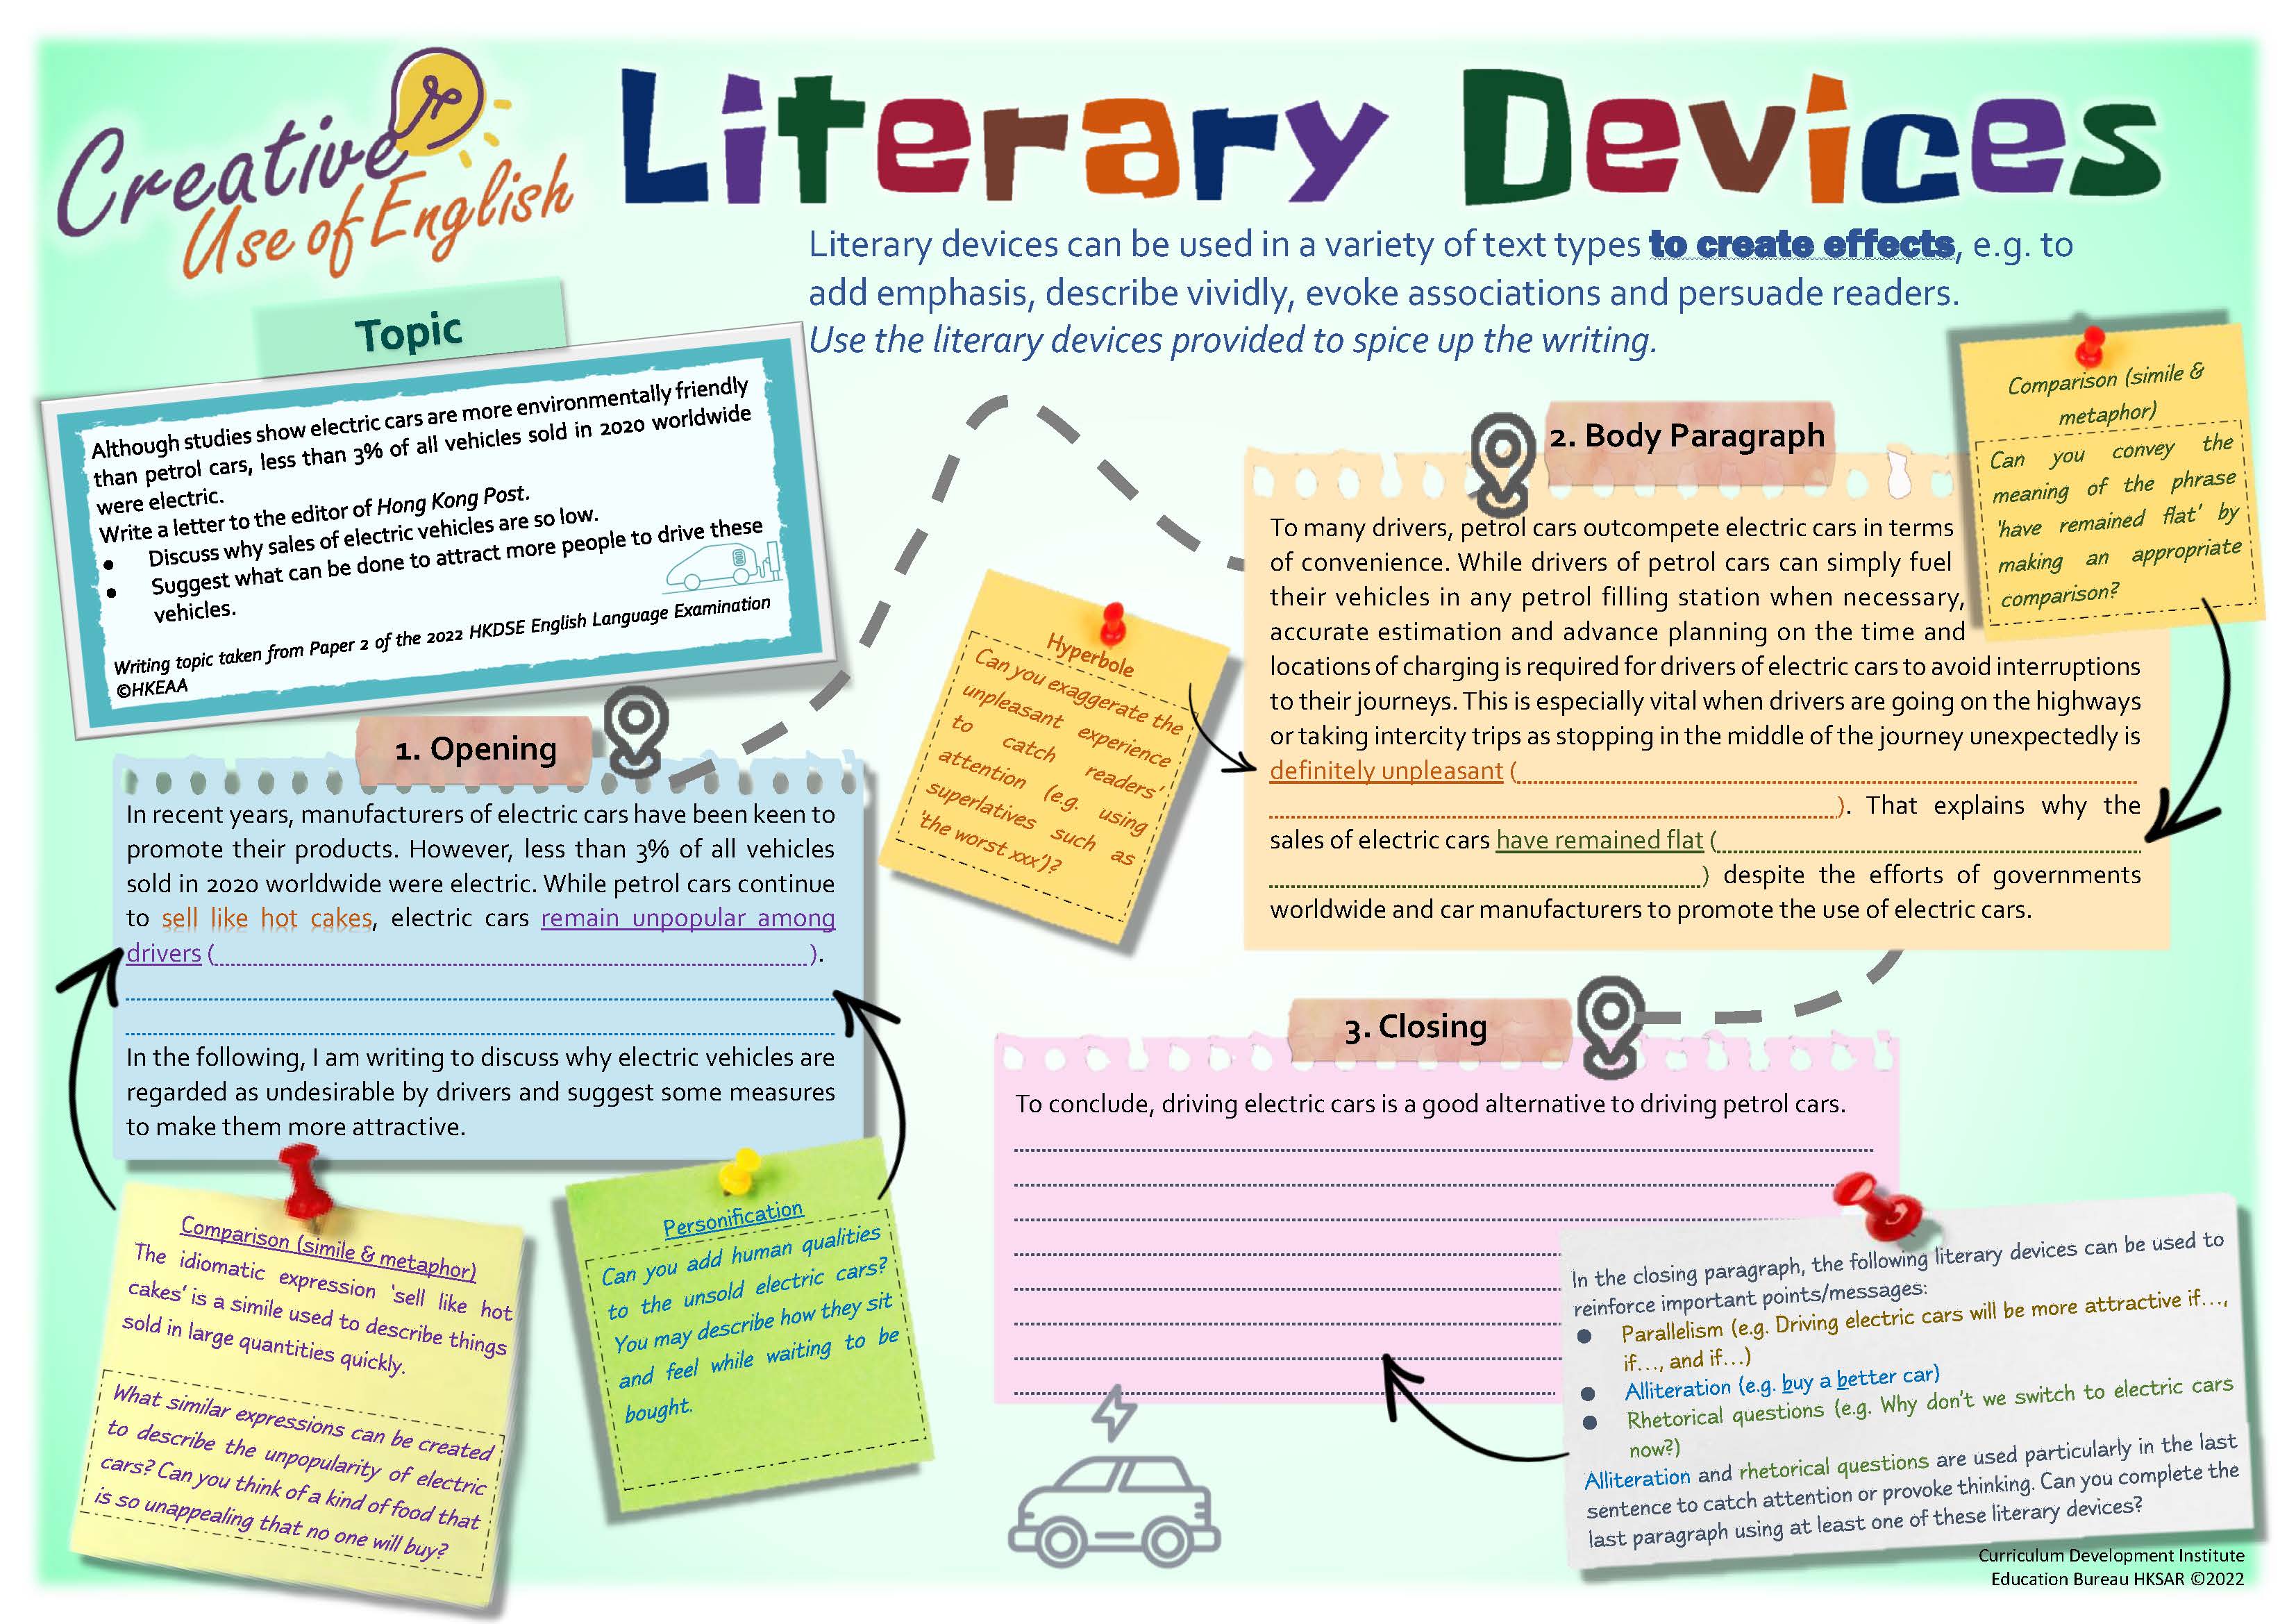 Literary Devices_WS